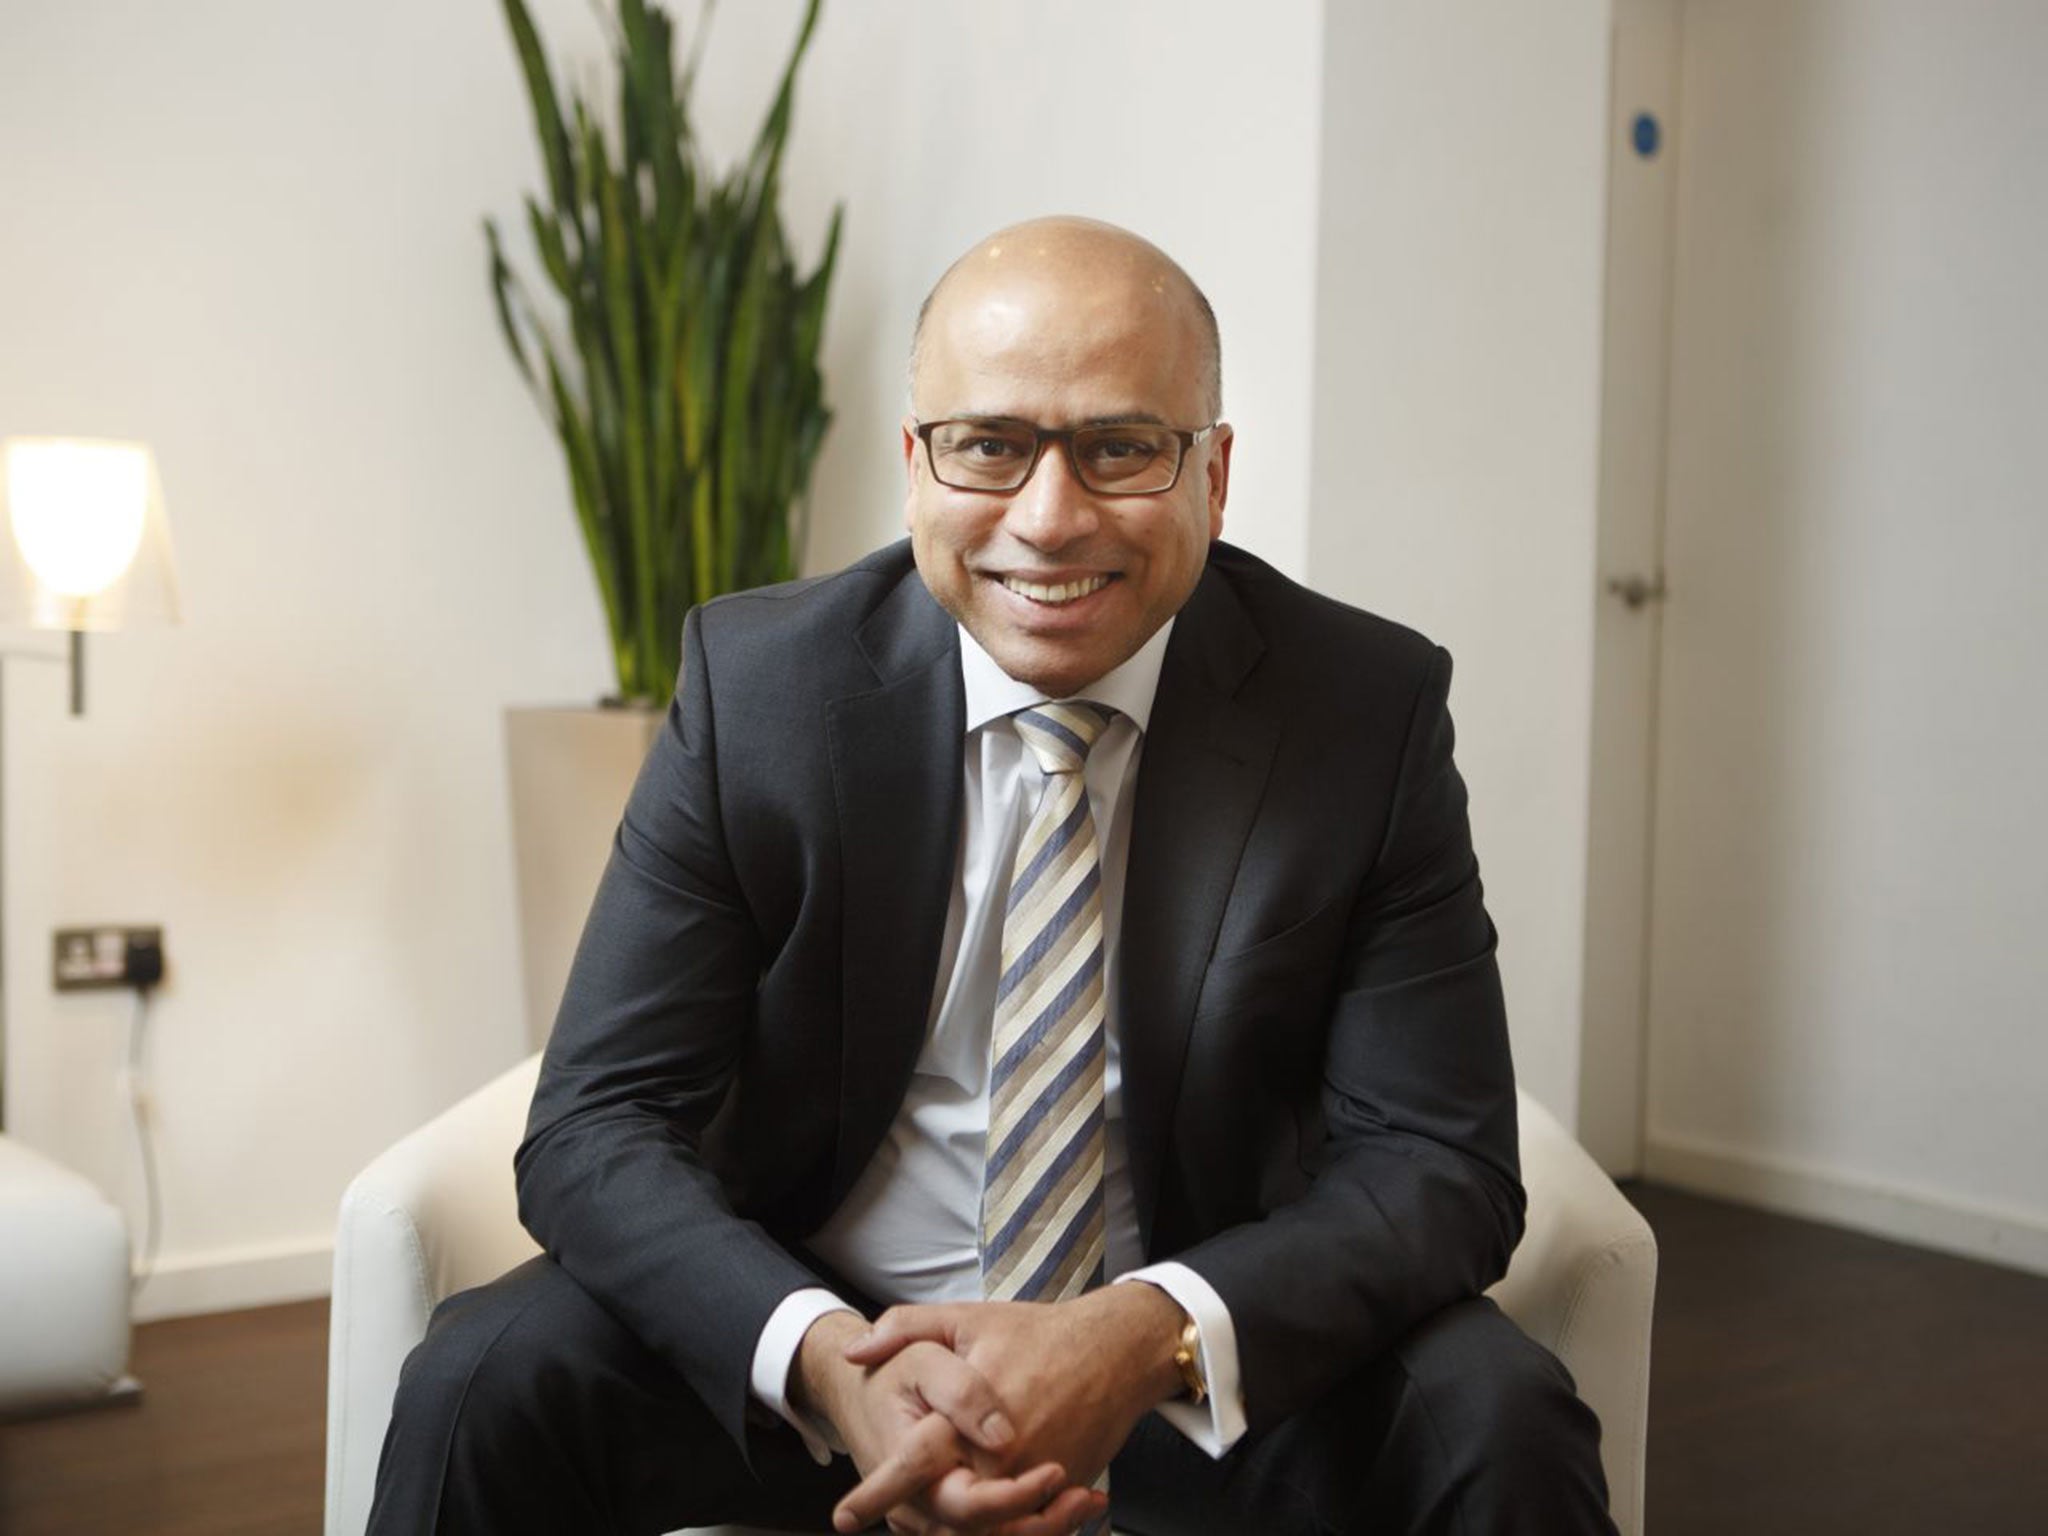 Sanjeev Gupta admits he did not study too hard at Cambridge – he was too busy running his trading company